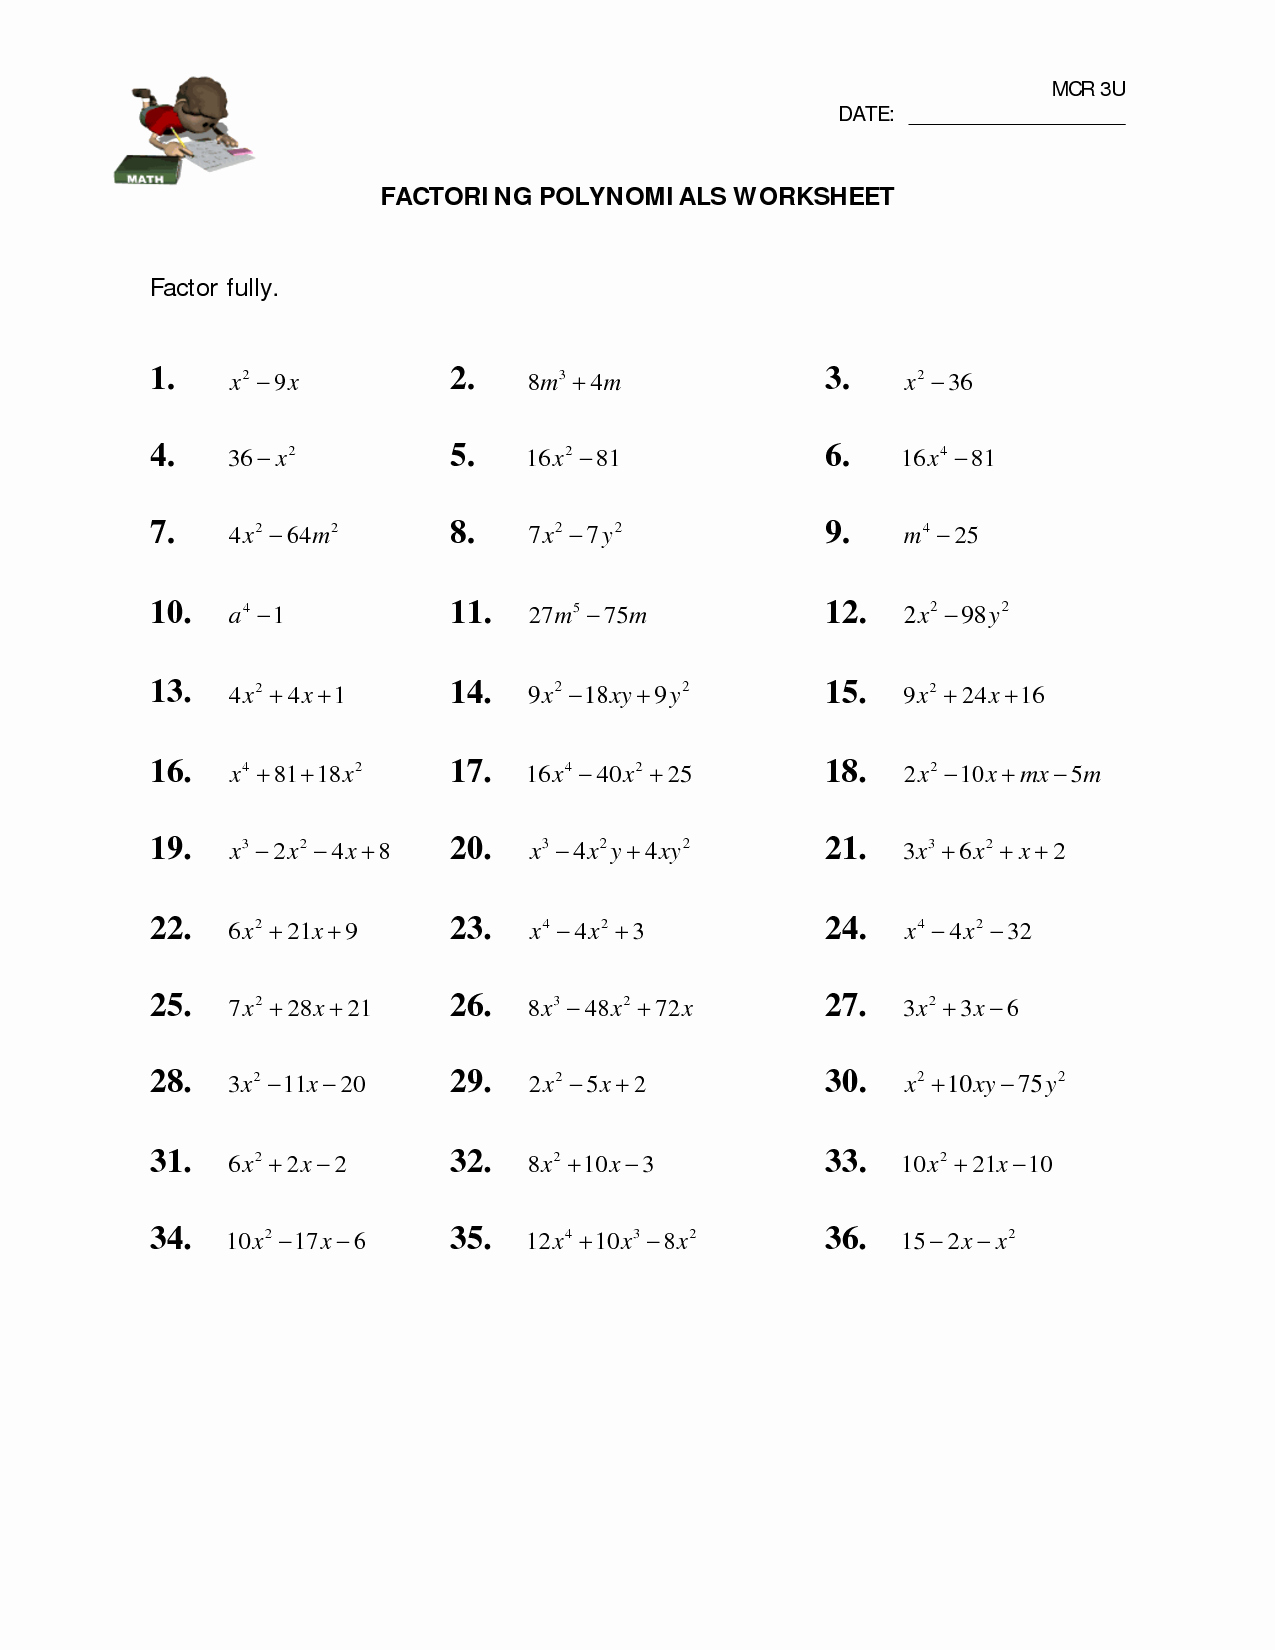 Factoring Trinomials Worksheet Answers Awesome 10 Best Of Factoring Polynomials Practice Worksheet